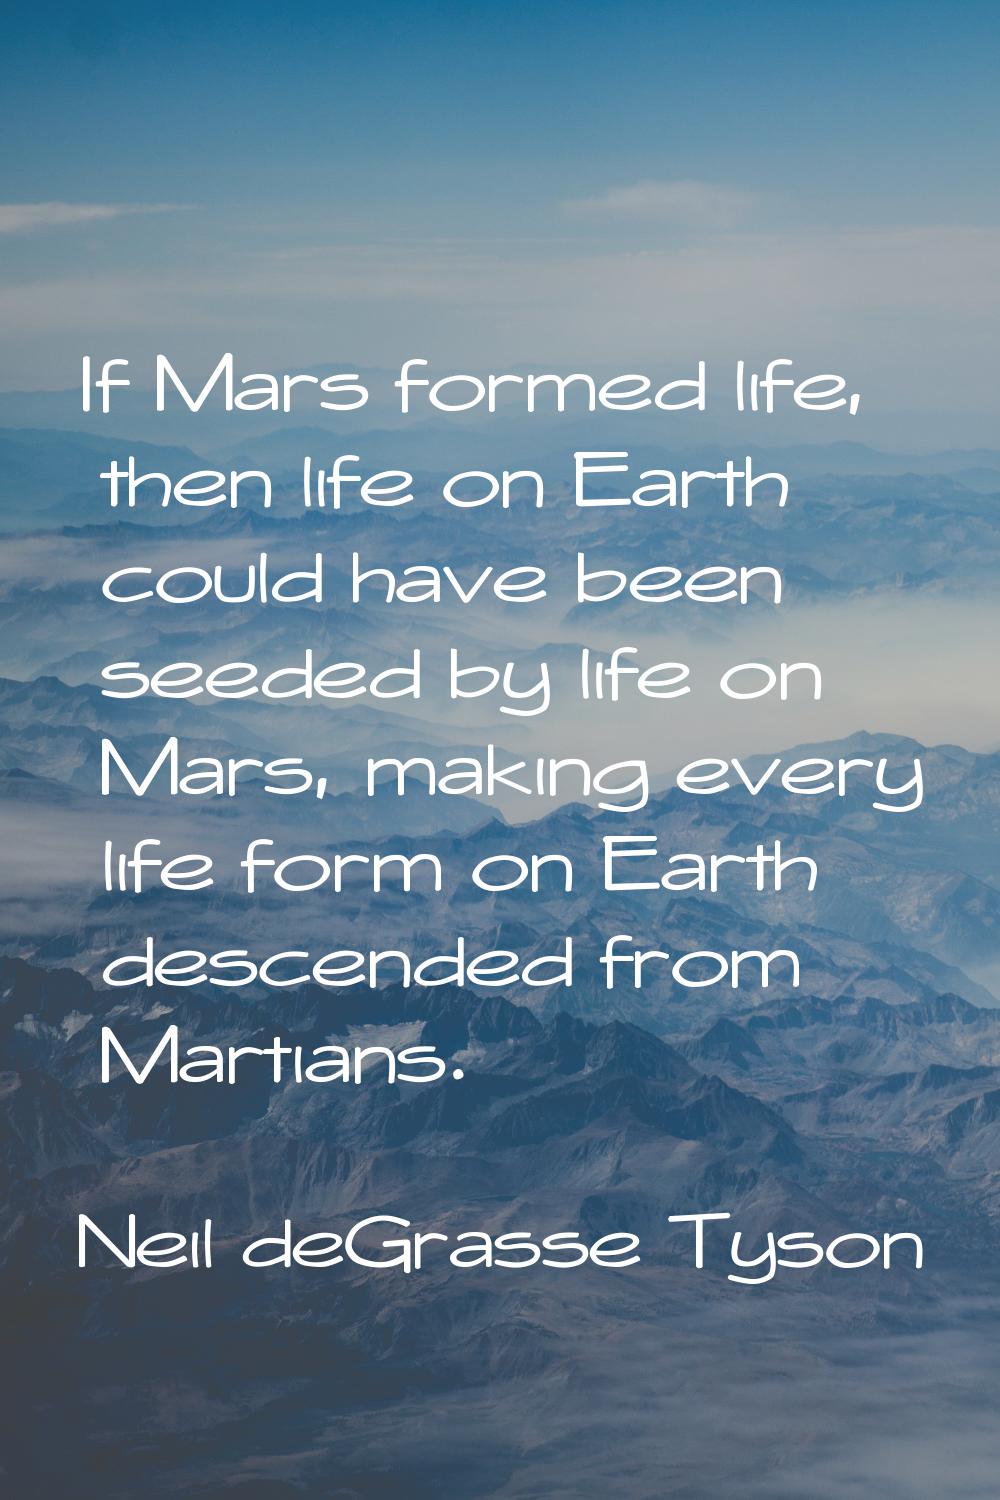 If Mars formed life, then life on Earth could have been seeded by life on Mars, making every life f